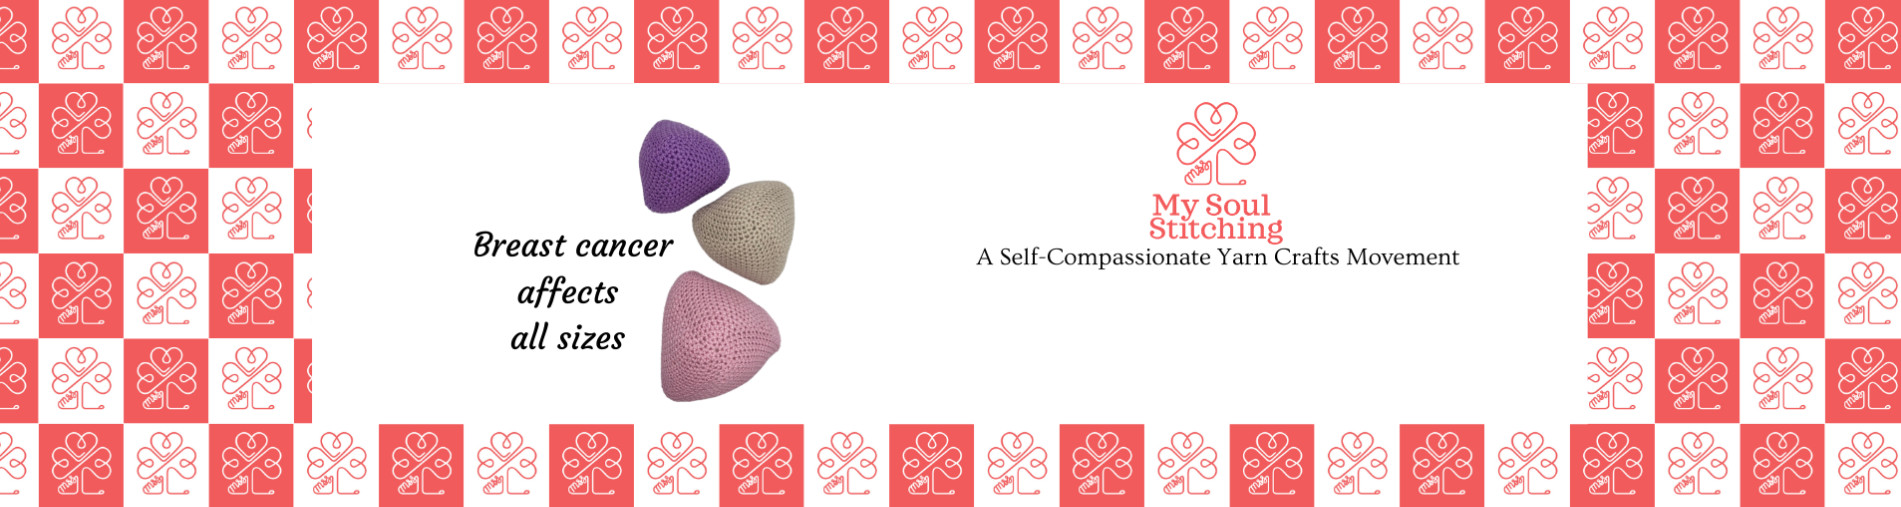 Self compassionate yarn crafts movement for breast cancer 